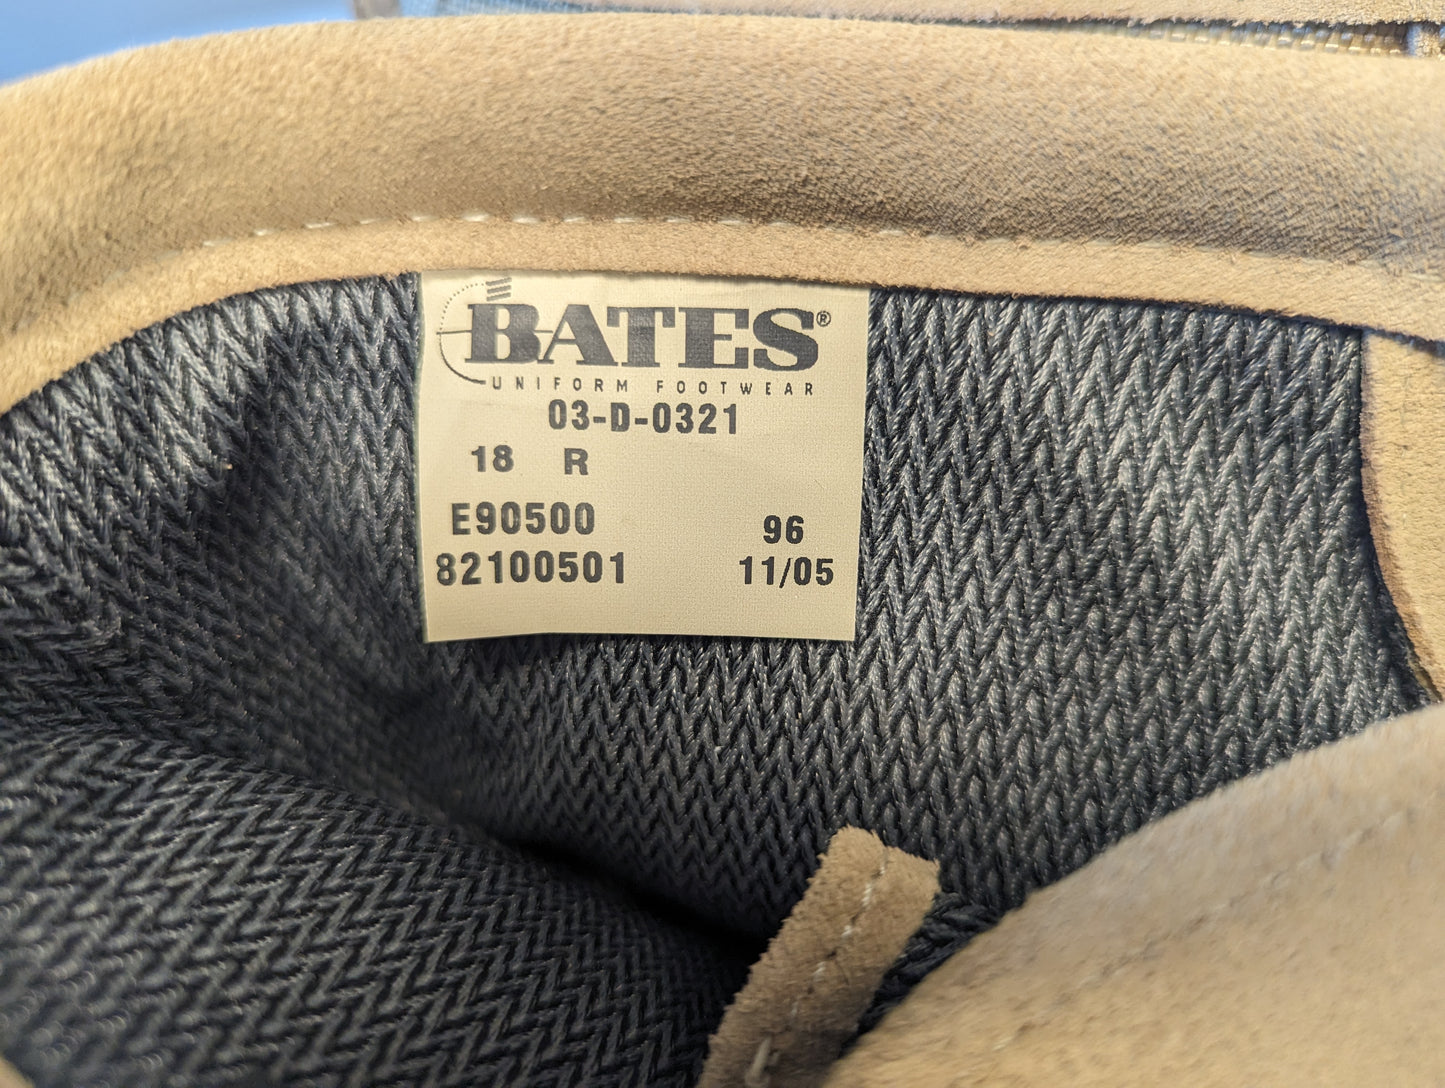 Bates Hot Weather 18R - NEW